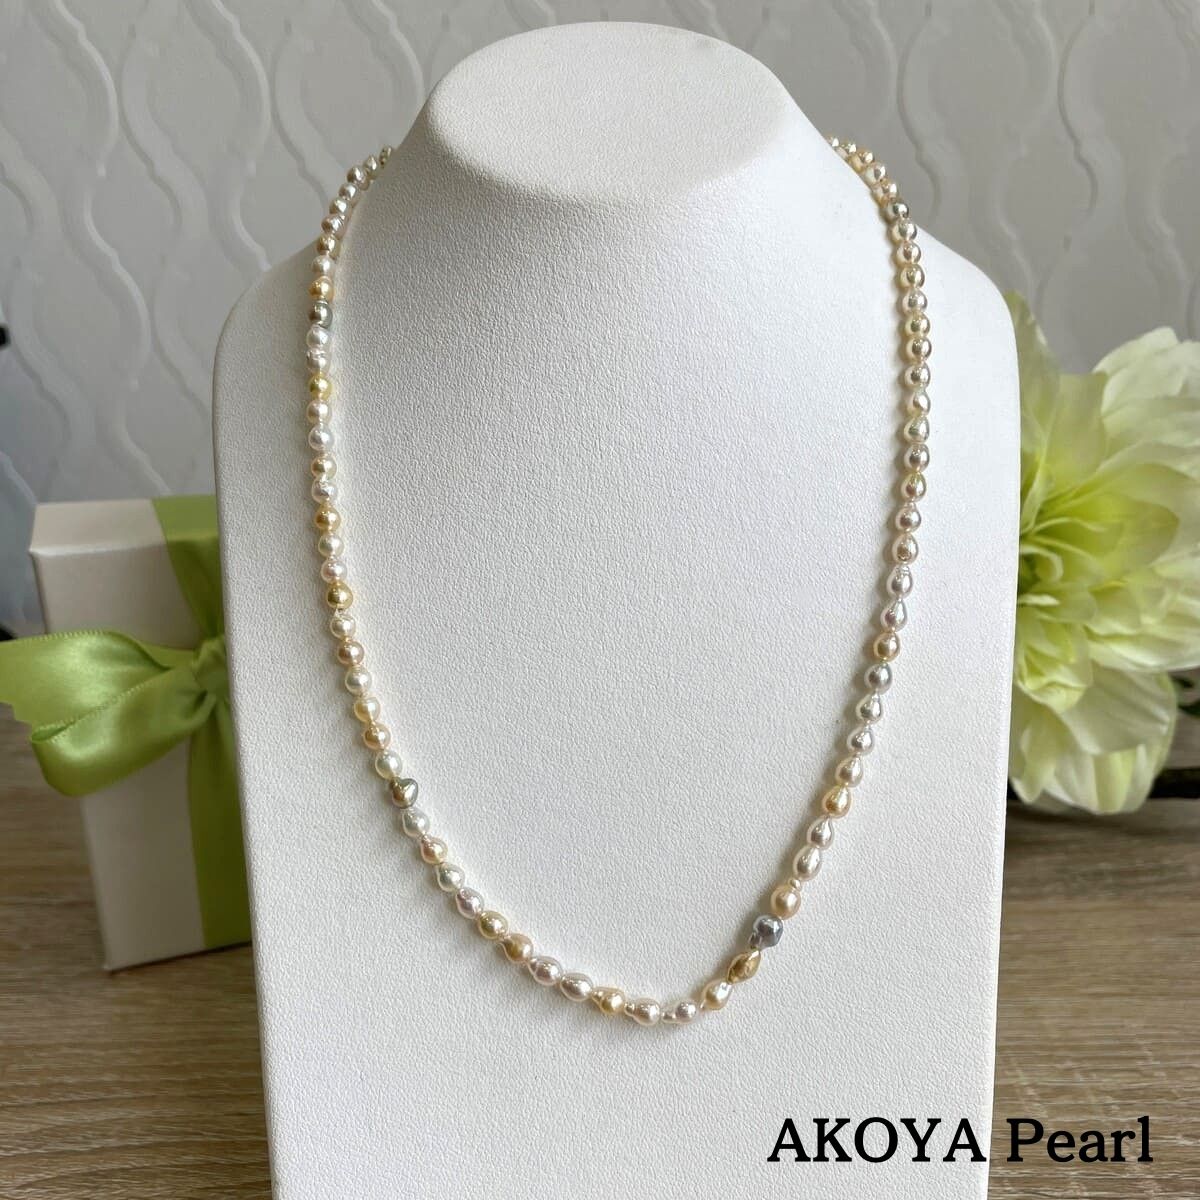 [AKOYA pearl] K18 babypearl necklace appropximately 40cm es-014